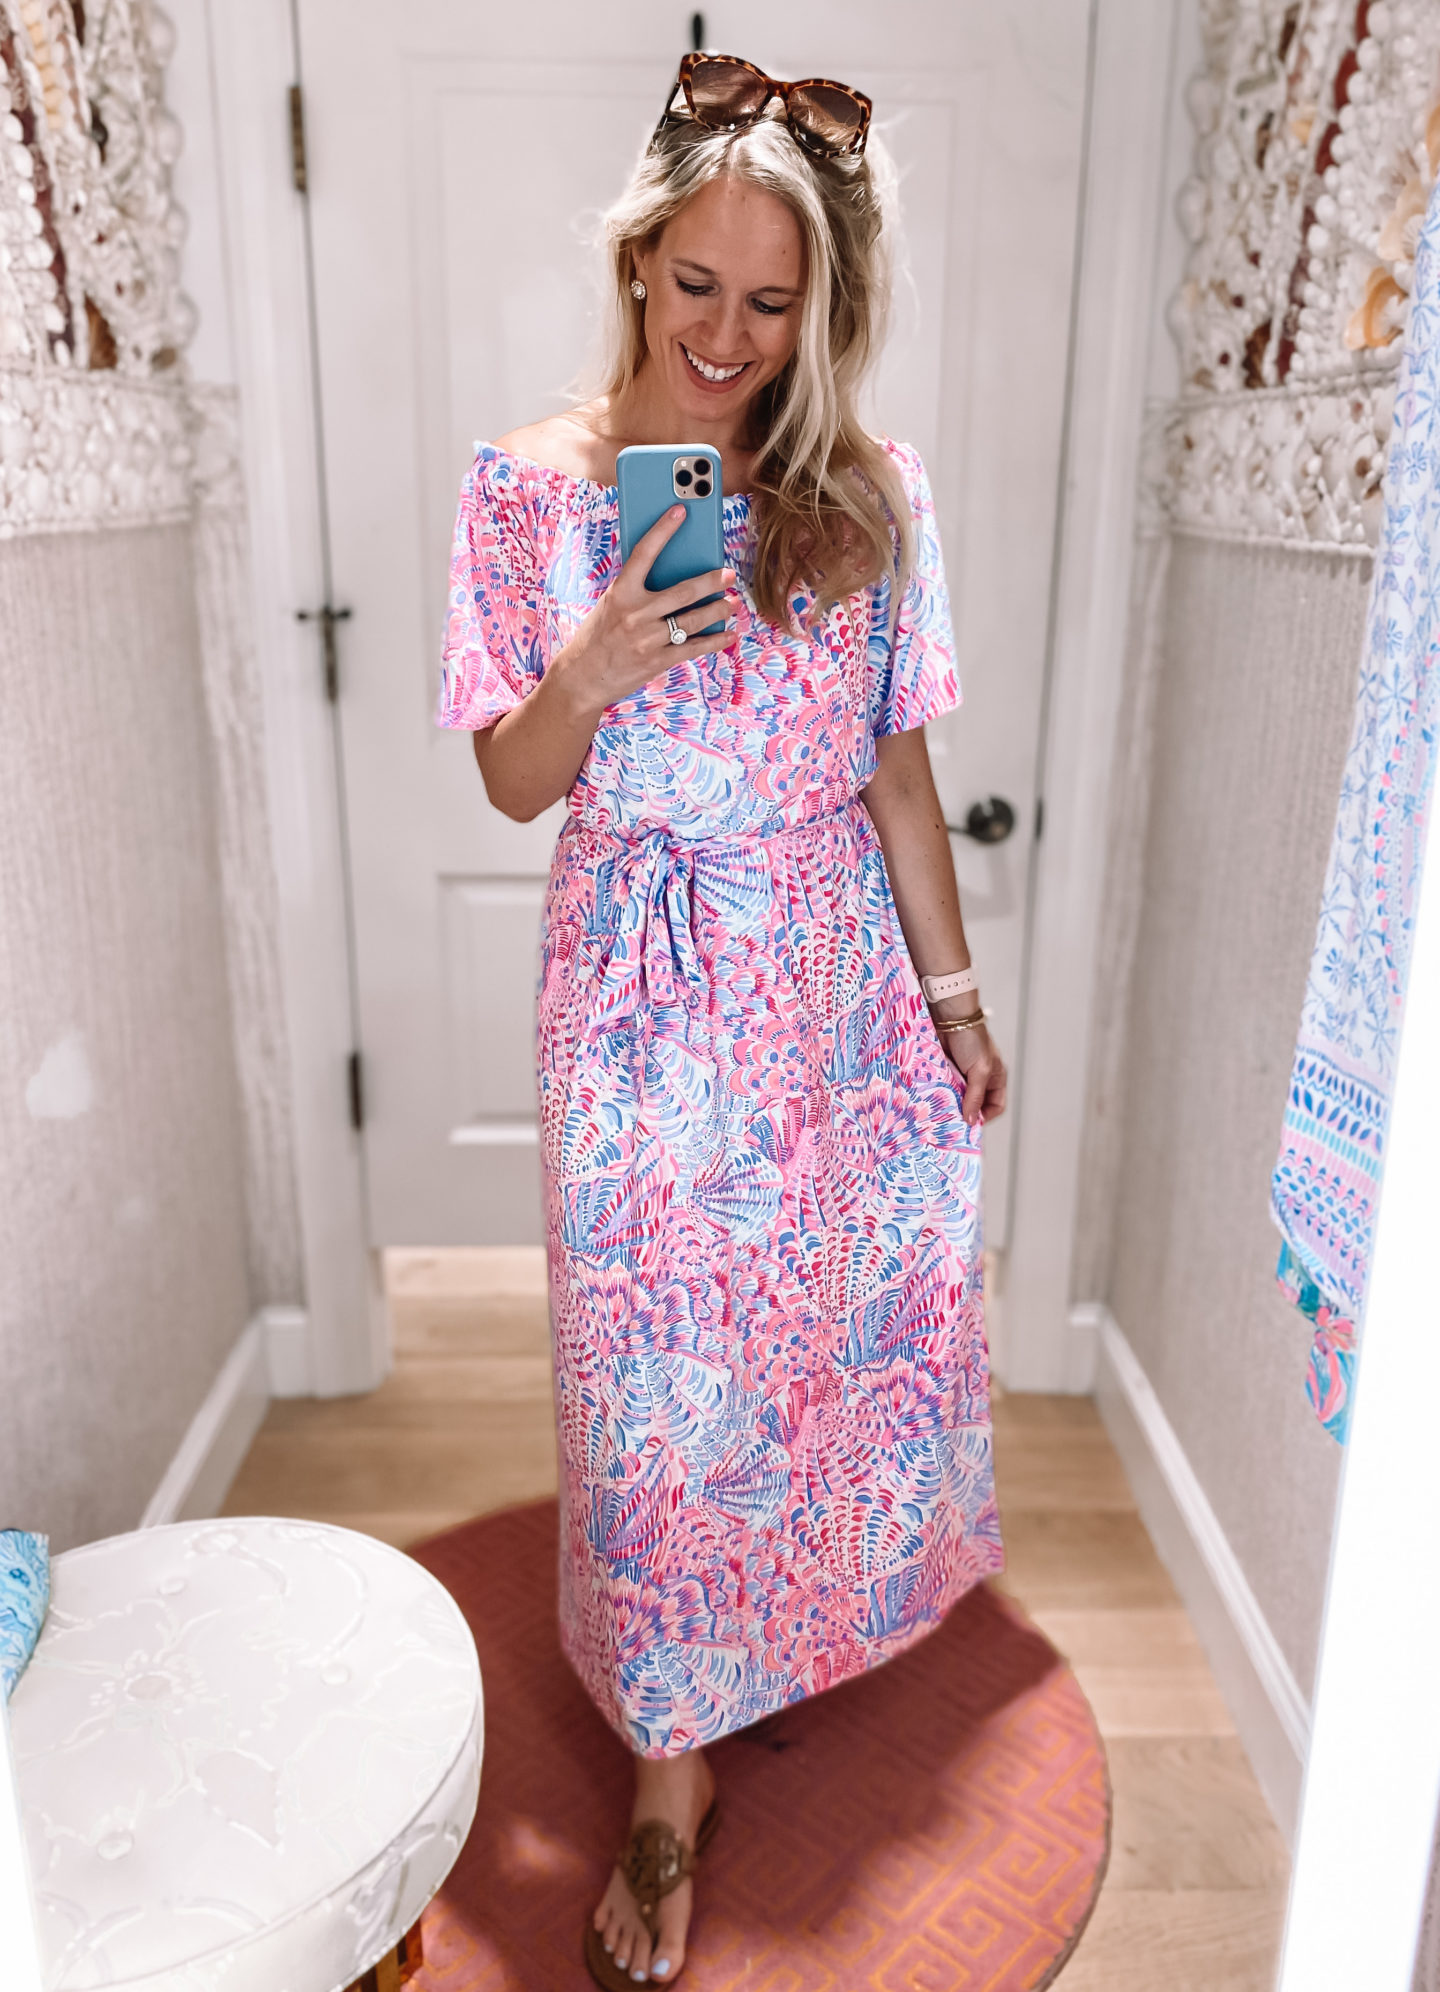 2021 Lilly Pulitzer Sale predictions | Lilly Pulitzer after party sale | the Lilly Sunshine Sale | Summer 2021 Lilly Pulitzer Sale